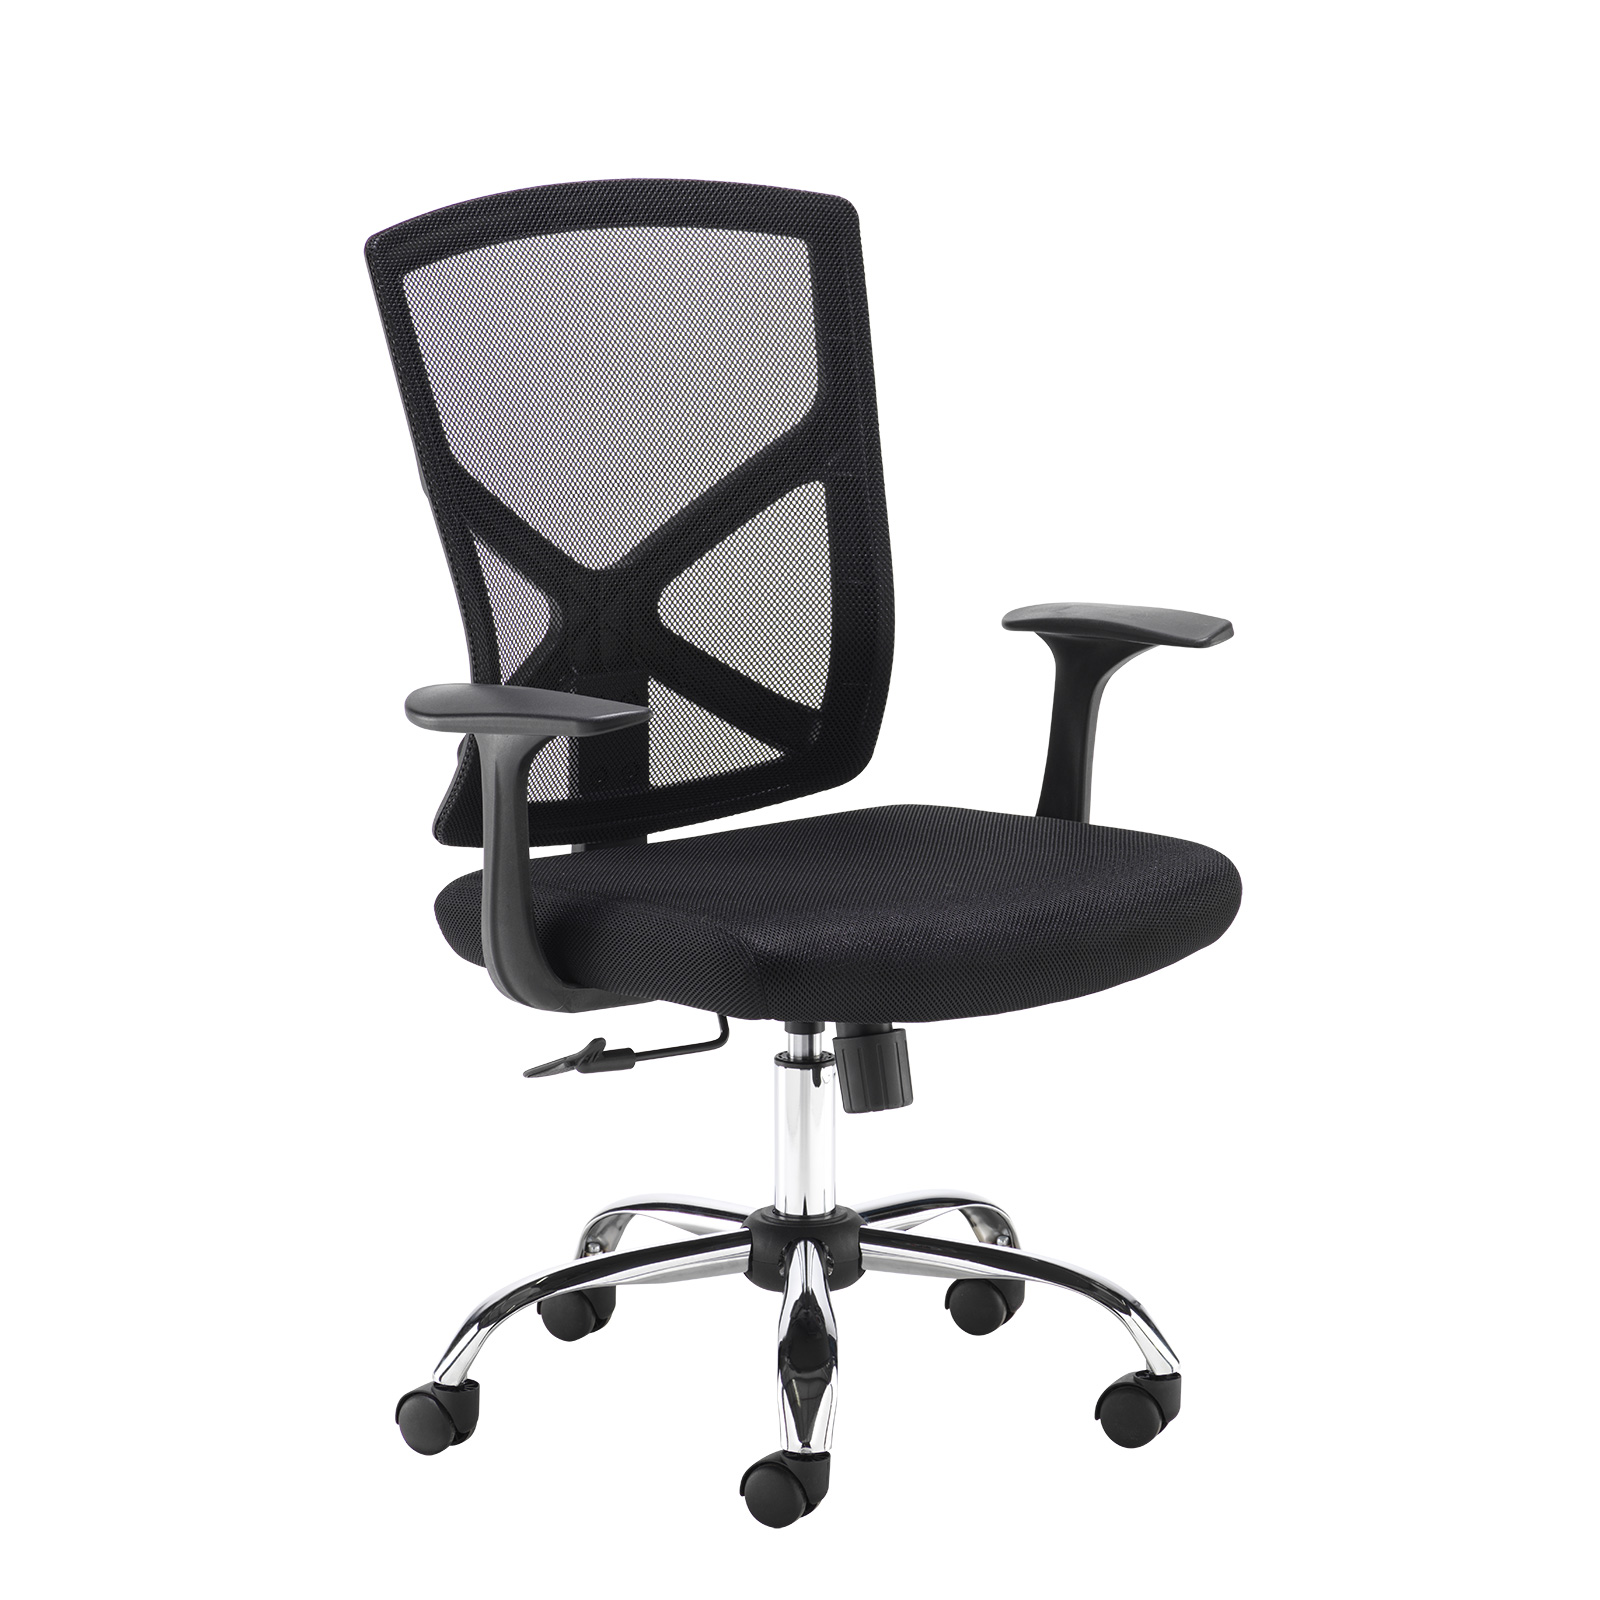 Hale Black Mesh Back Operator Chair with Black Fabric Seat